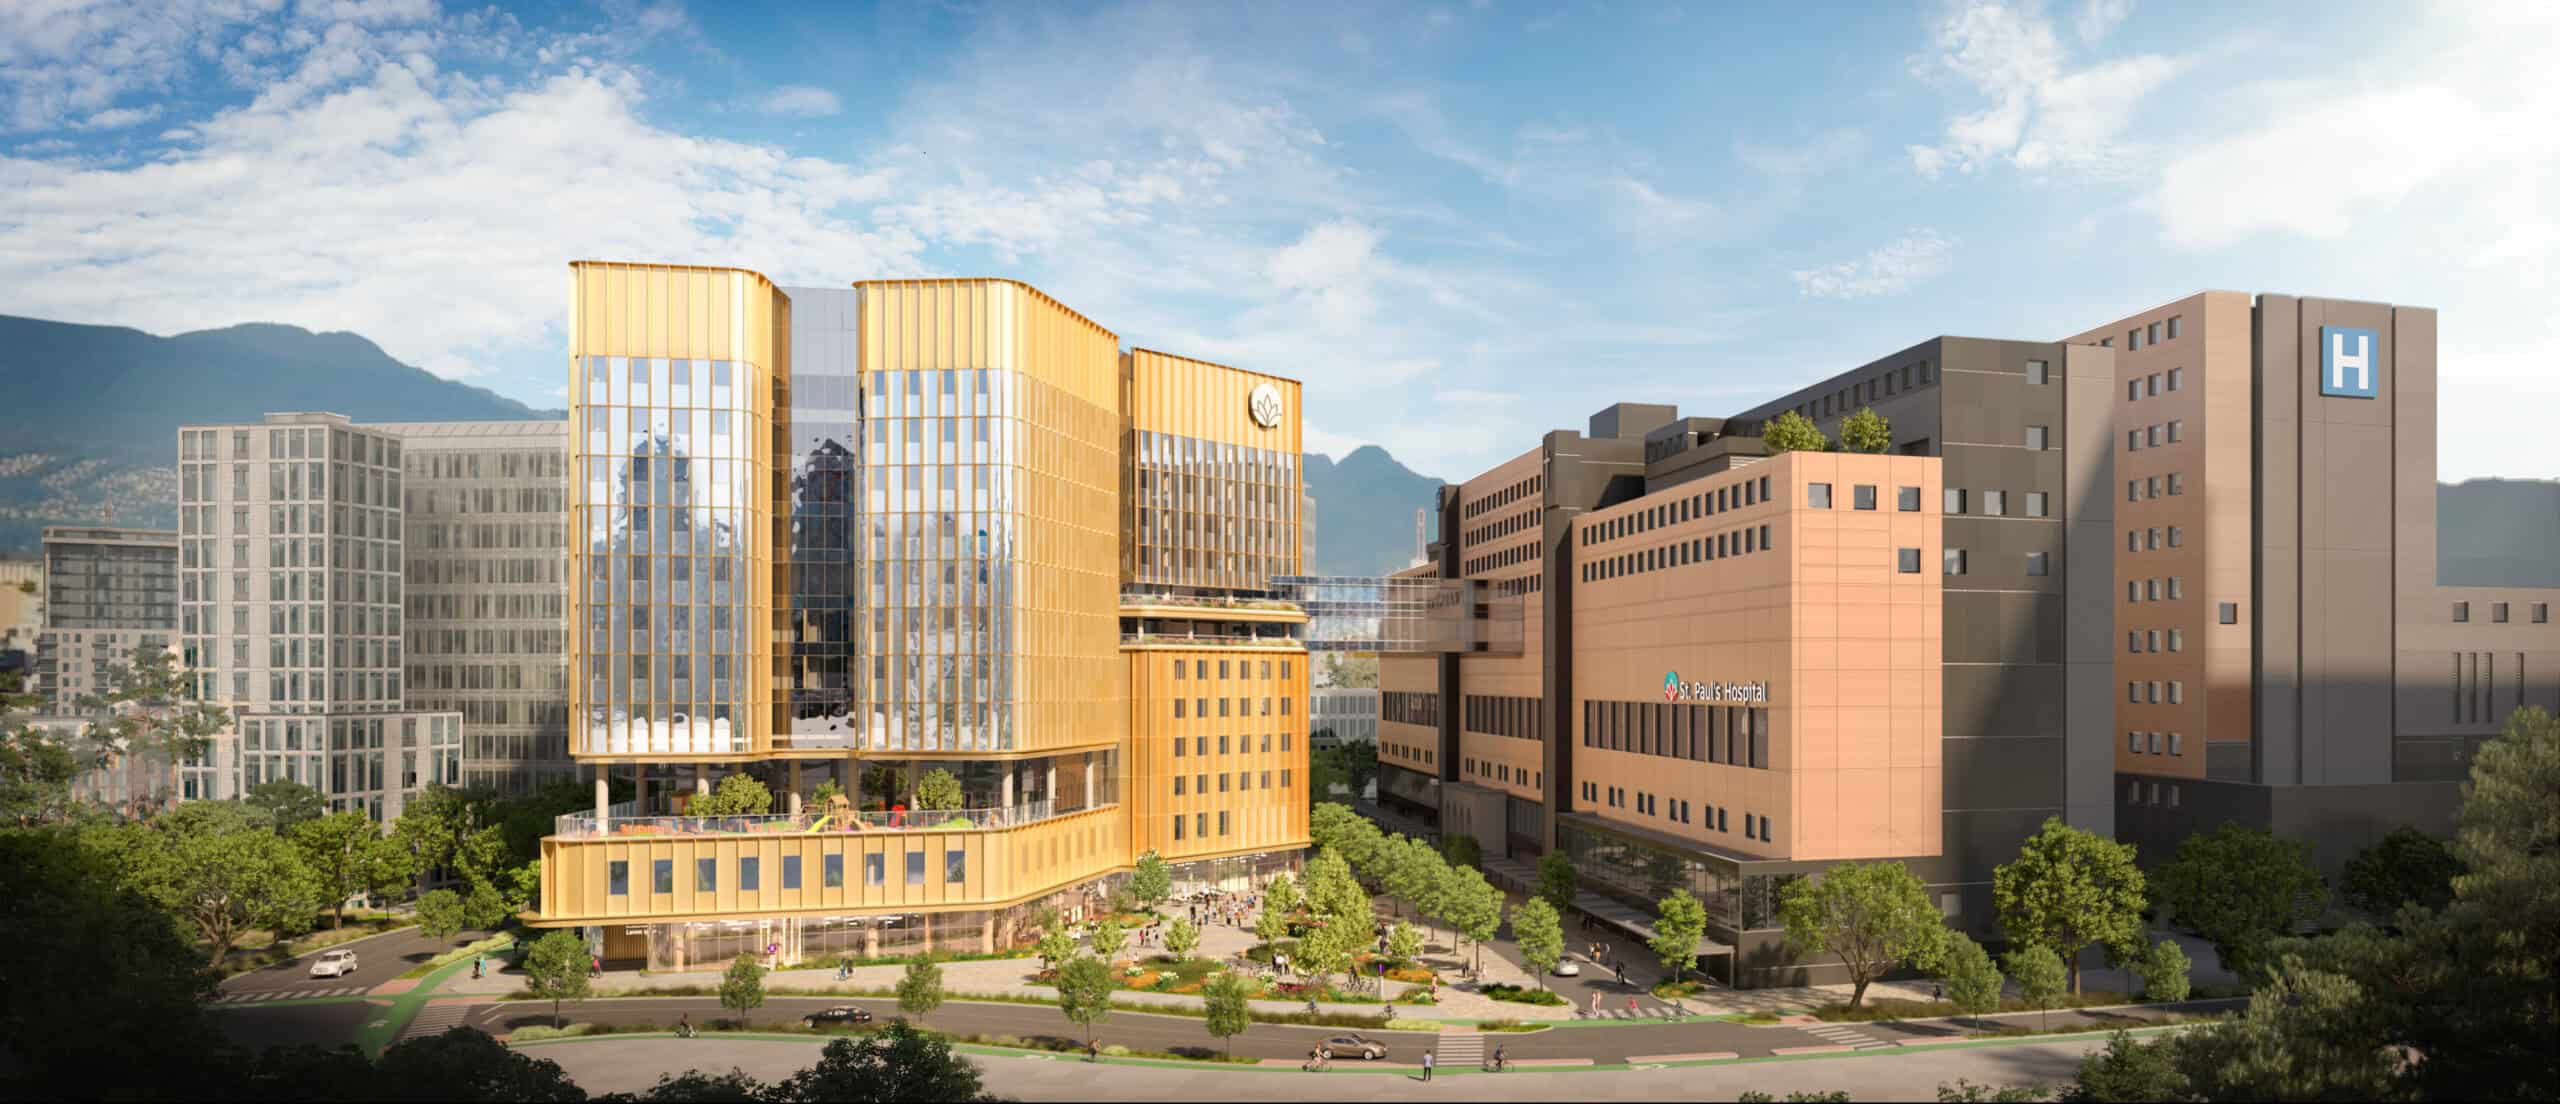 Render of the new St. Paul's Hospital and Clinical Support and Research Centre on the Jim Pattison Medical Campus